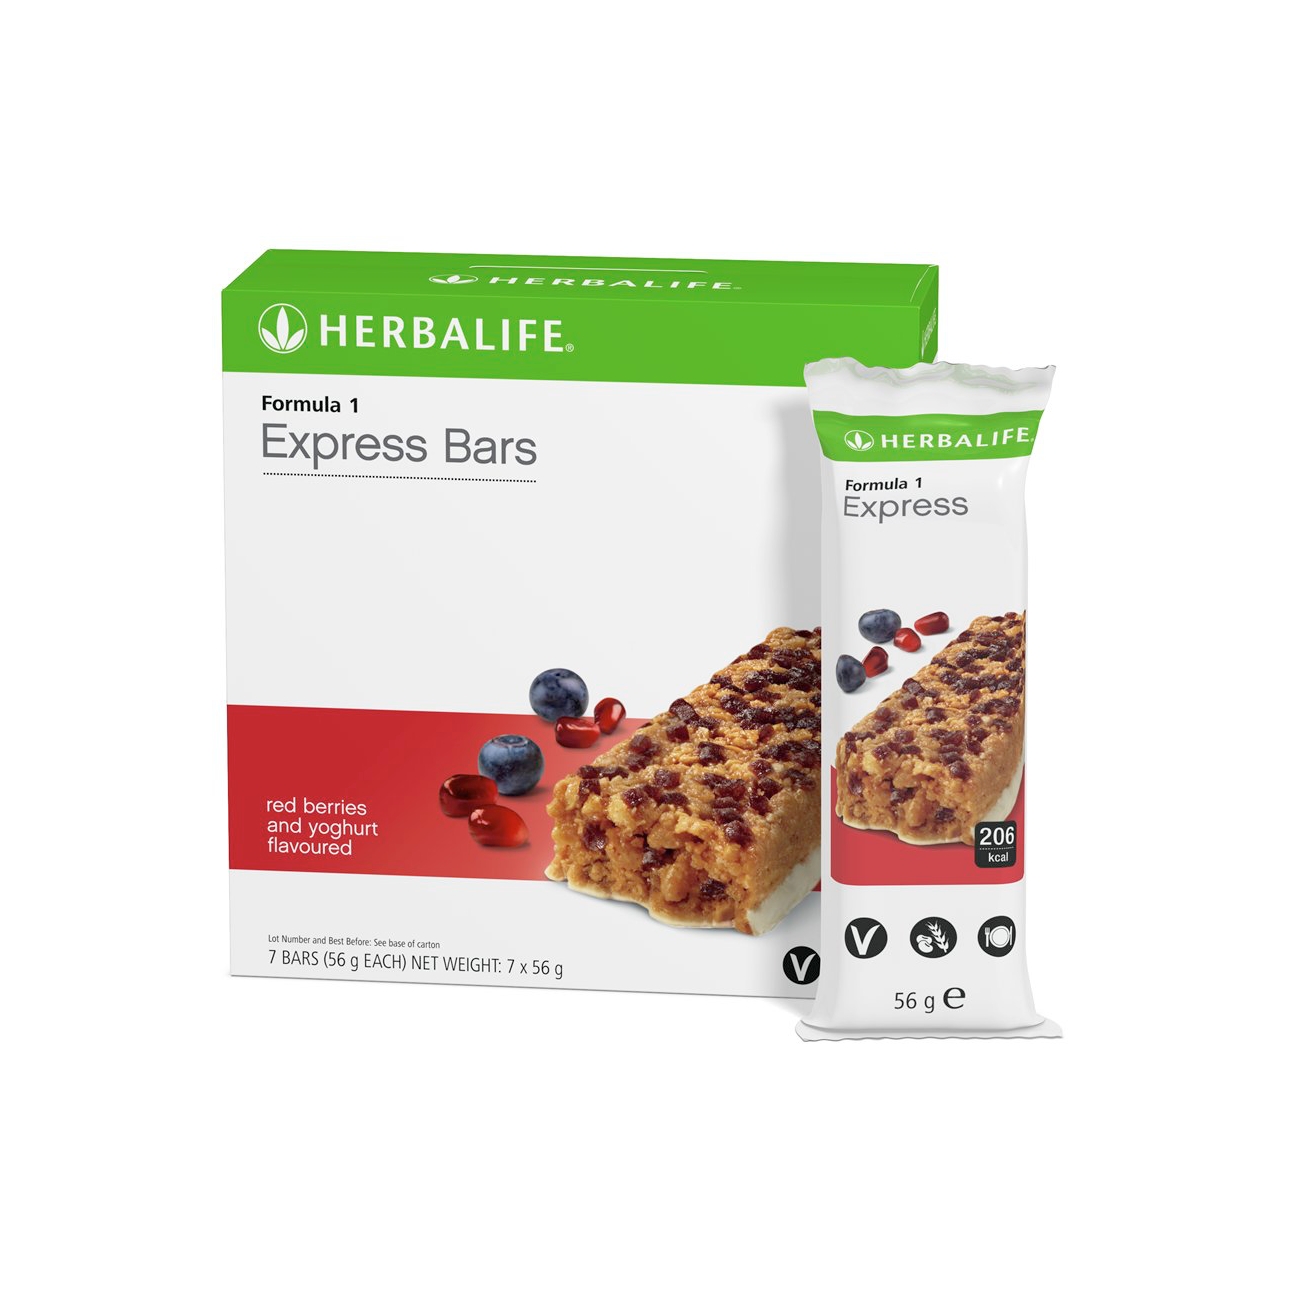 Formula 1 Express Bars  Red Berries and Yoghurt Flavoured product shot.